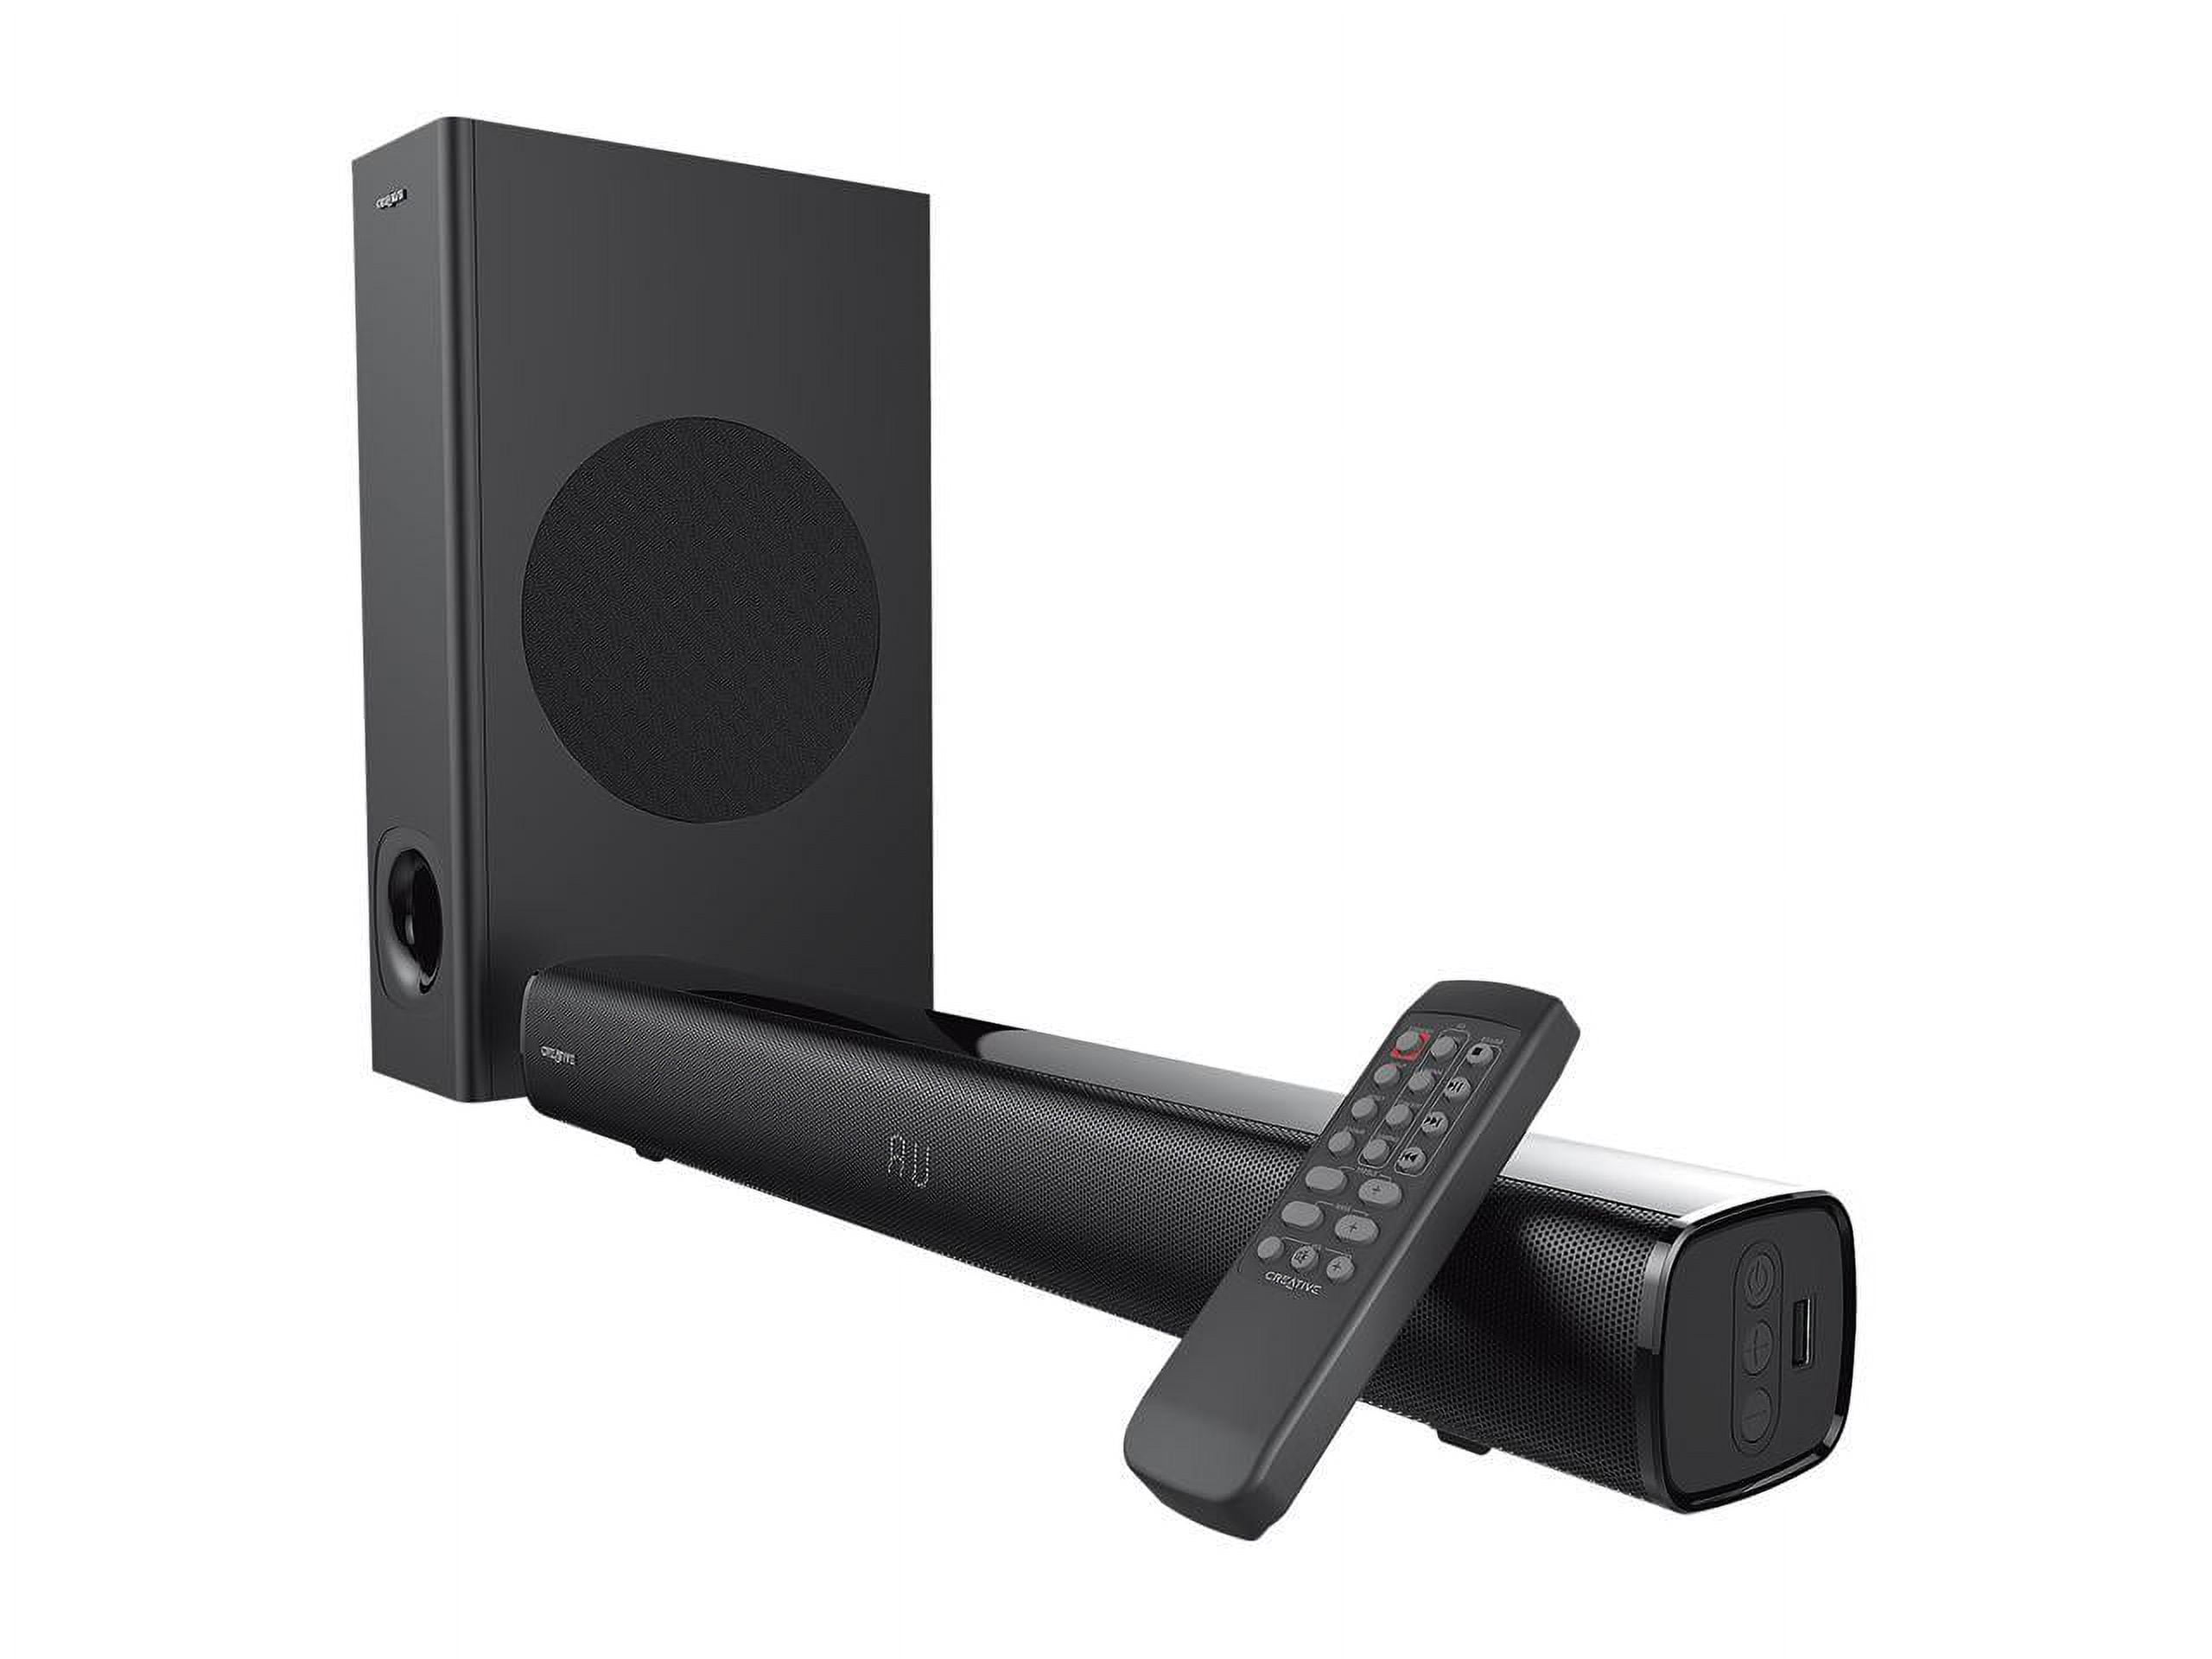 Channel Bluetooth/Optical Computers, Input/TV for Creative Under-Monitor Ultrawide 2.1 Stage Subwoofer Mounting and Monitors, with Remote Control Wall and TV, Kit Soundbar ARC/AUX-in,